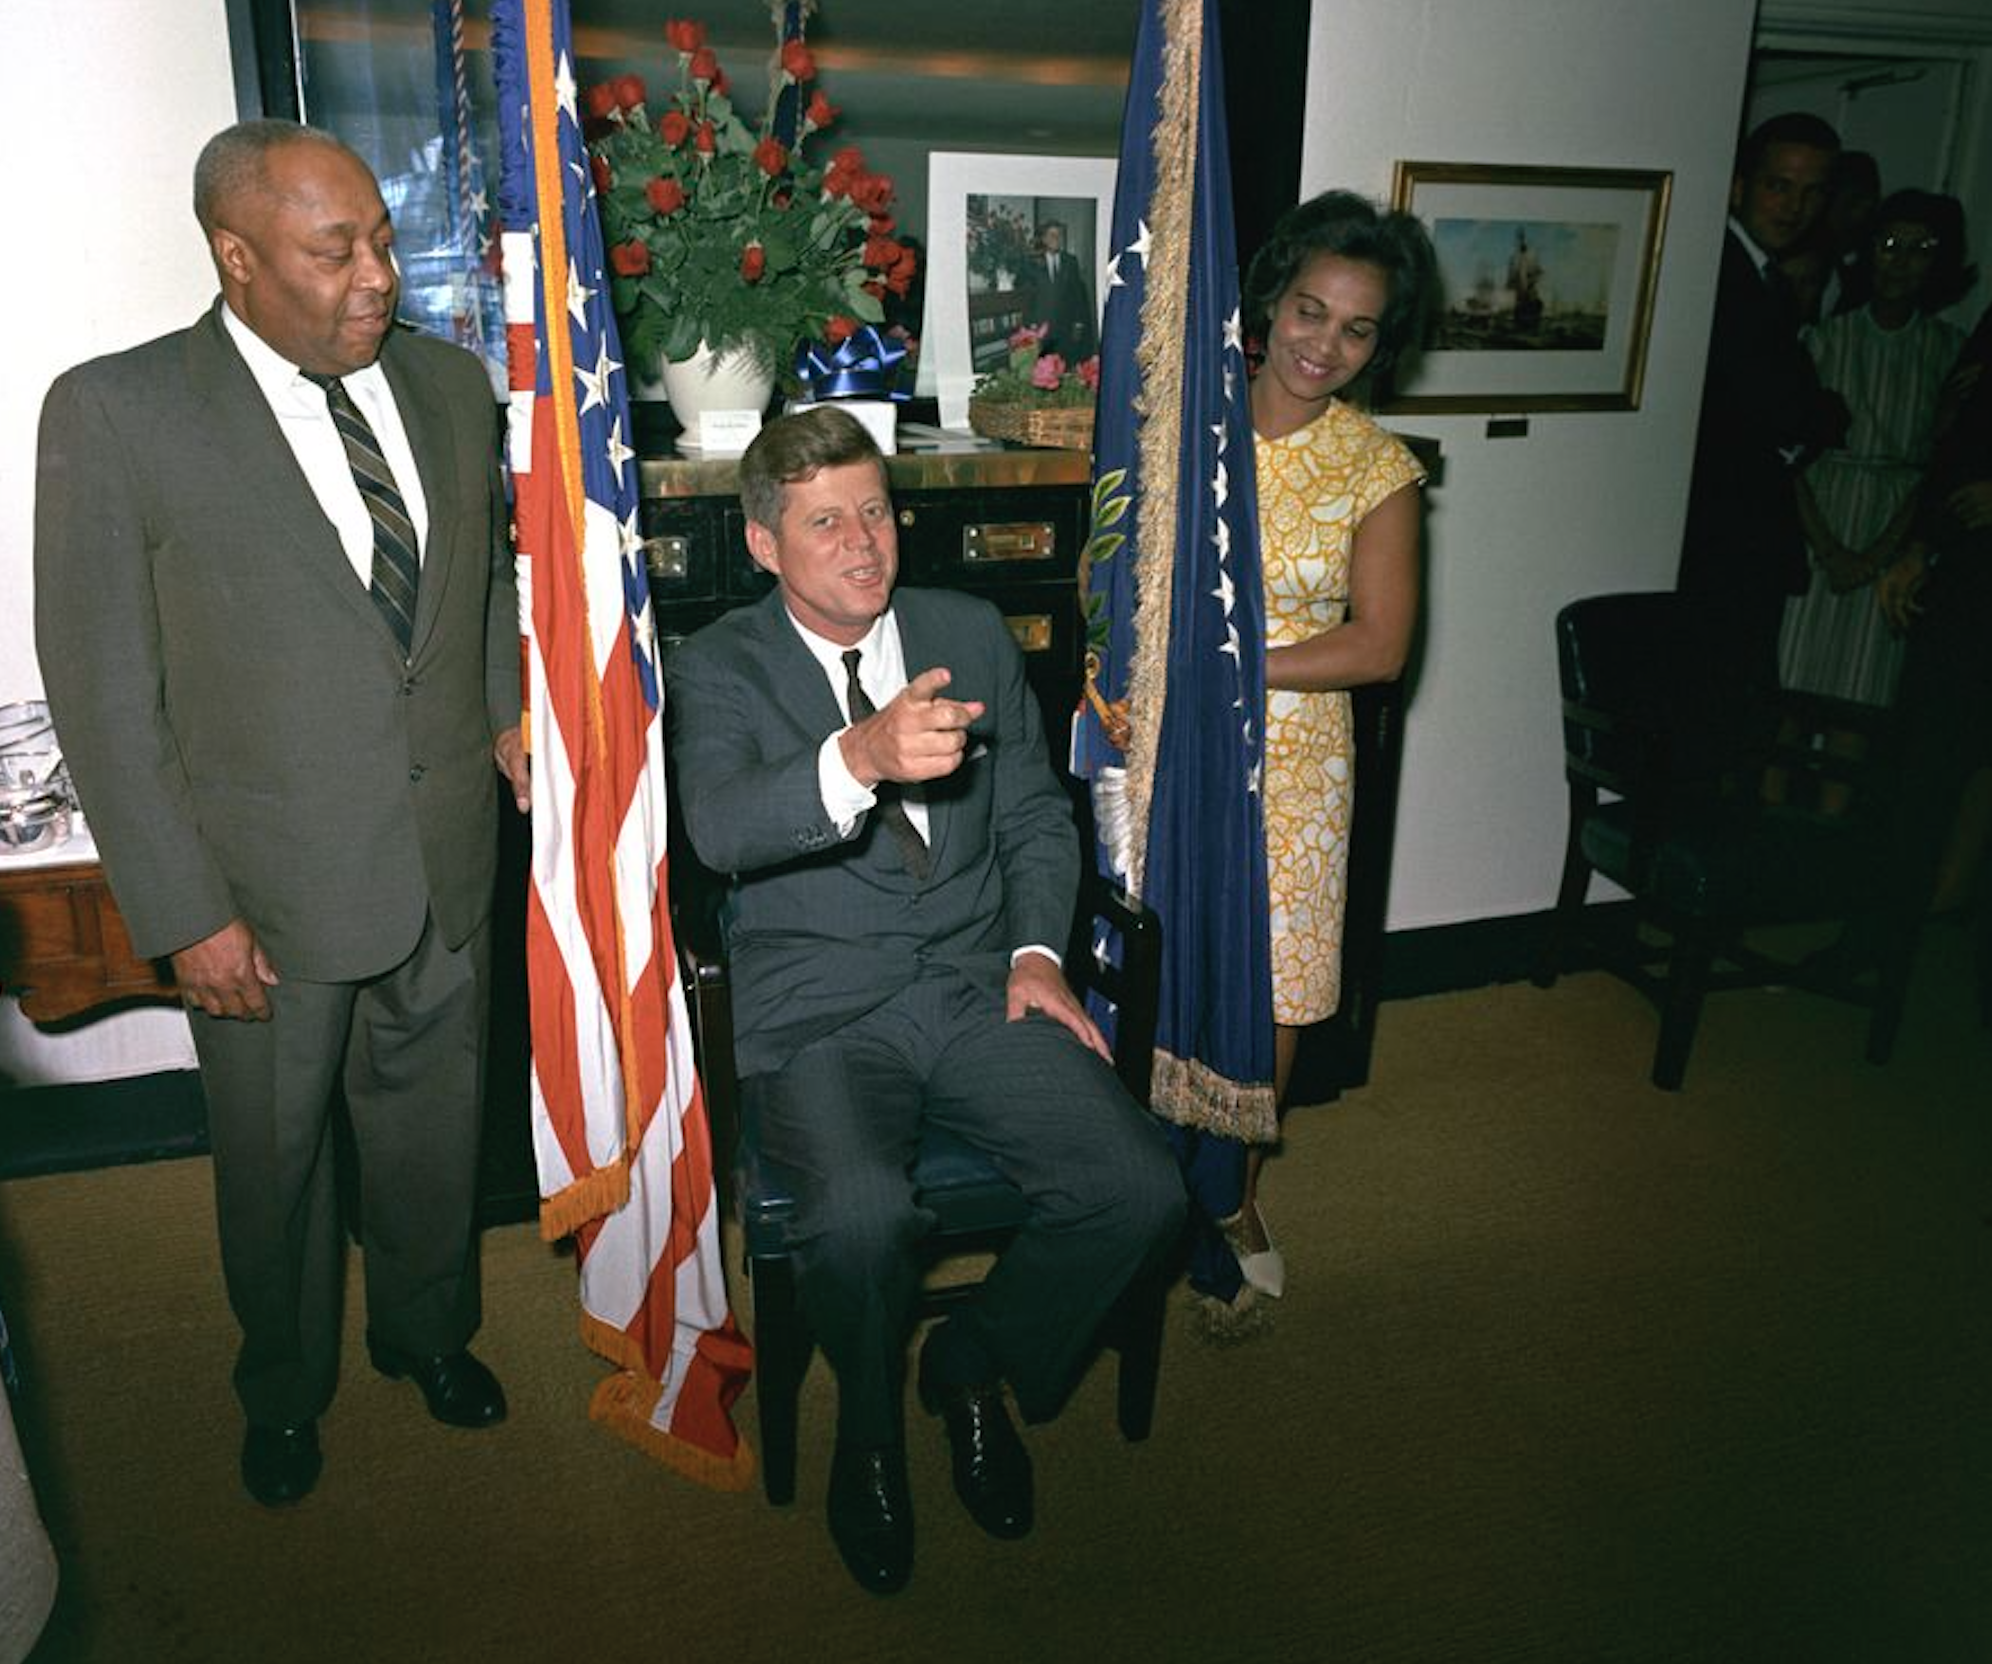 President John F. Kennedy (center) attends a surprise party thrown by members of the White House staff in honor of his 46th birthday. President Kennedy’s valet, George E. Thomas, stands at left; First Lady Jacqueline Kennedy's personal assistant, Providencia "Provi" Paredes, stands at right. 